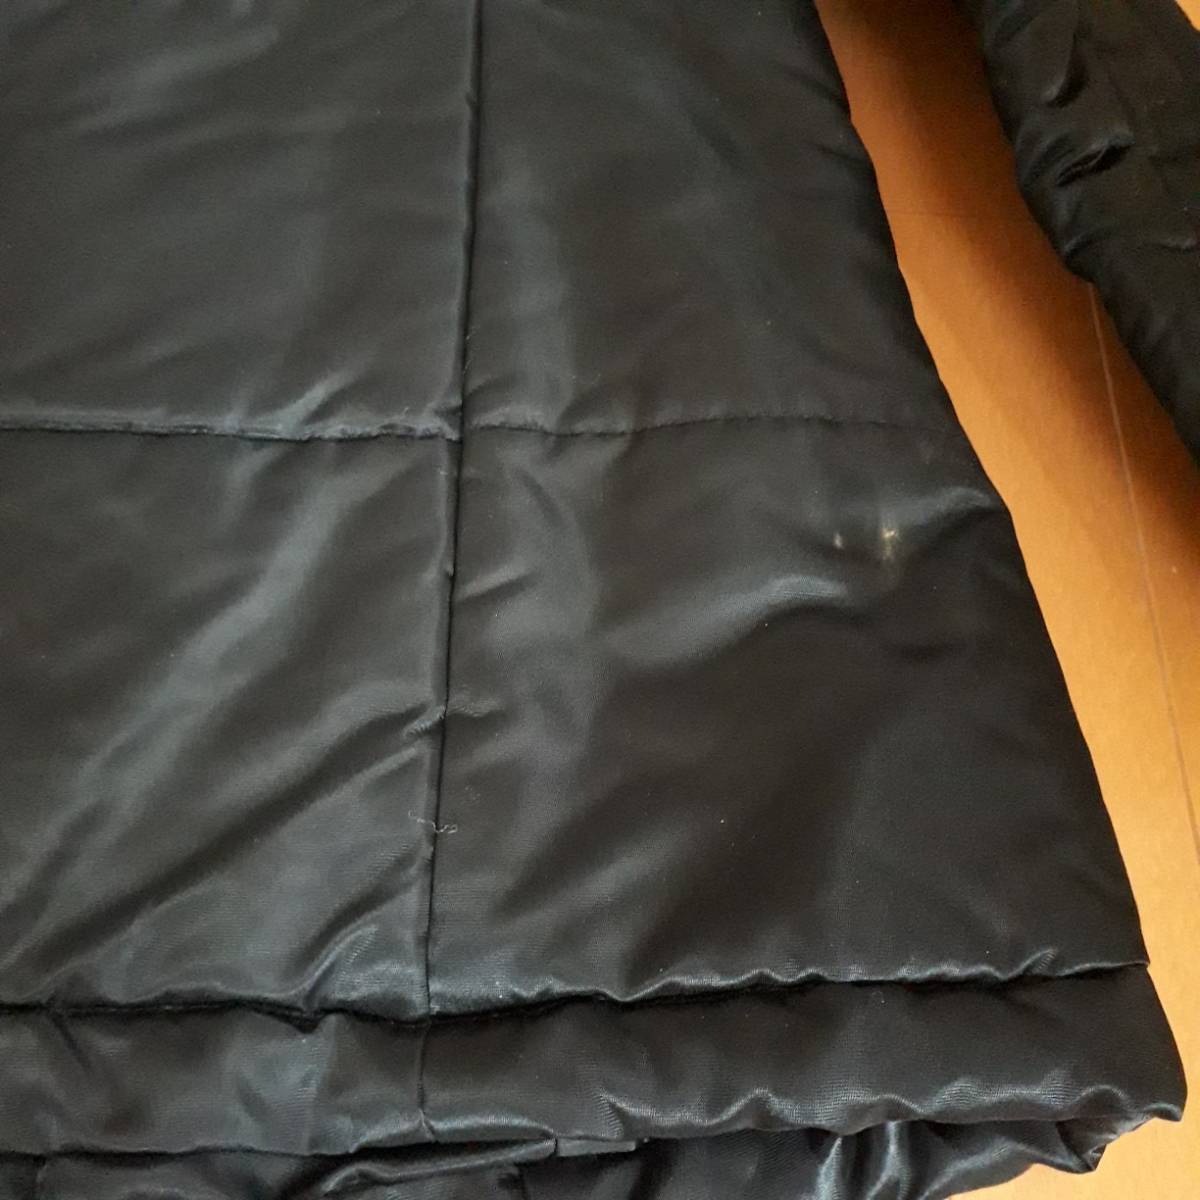  can two down coat black cantwo